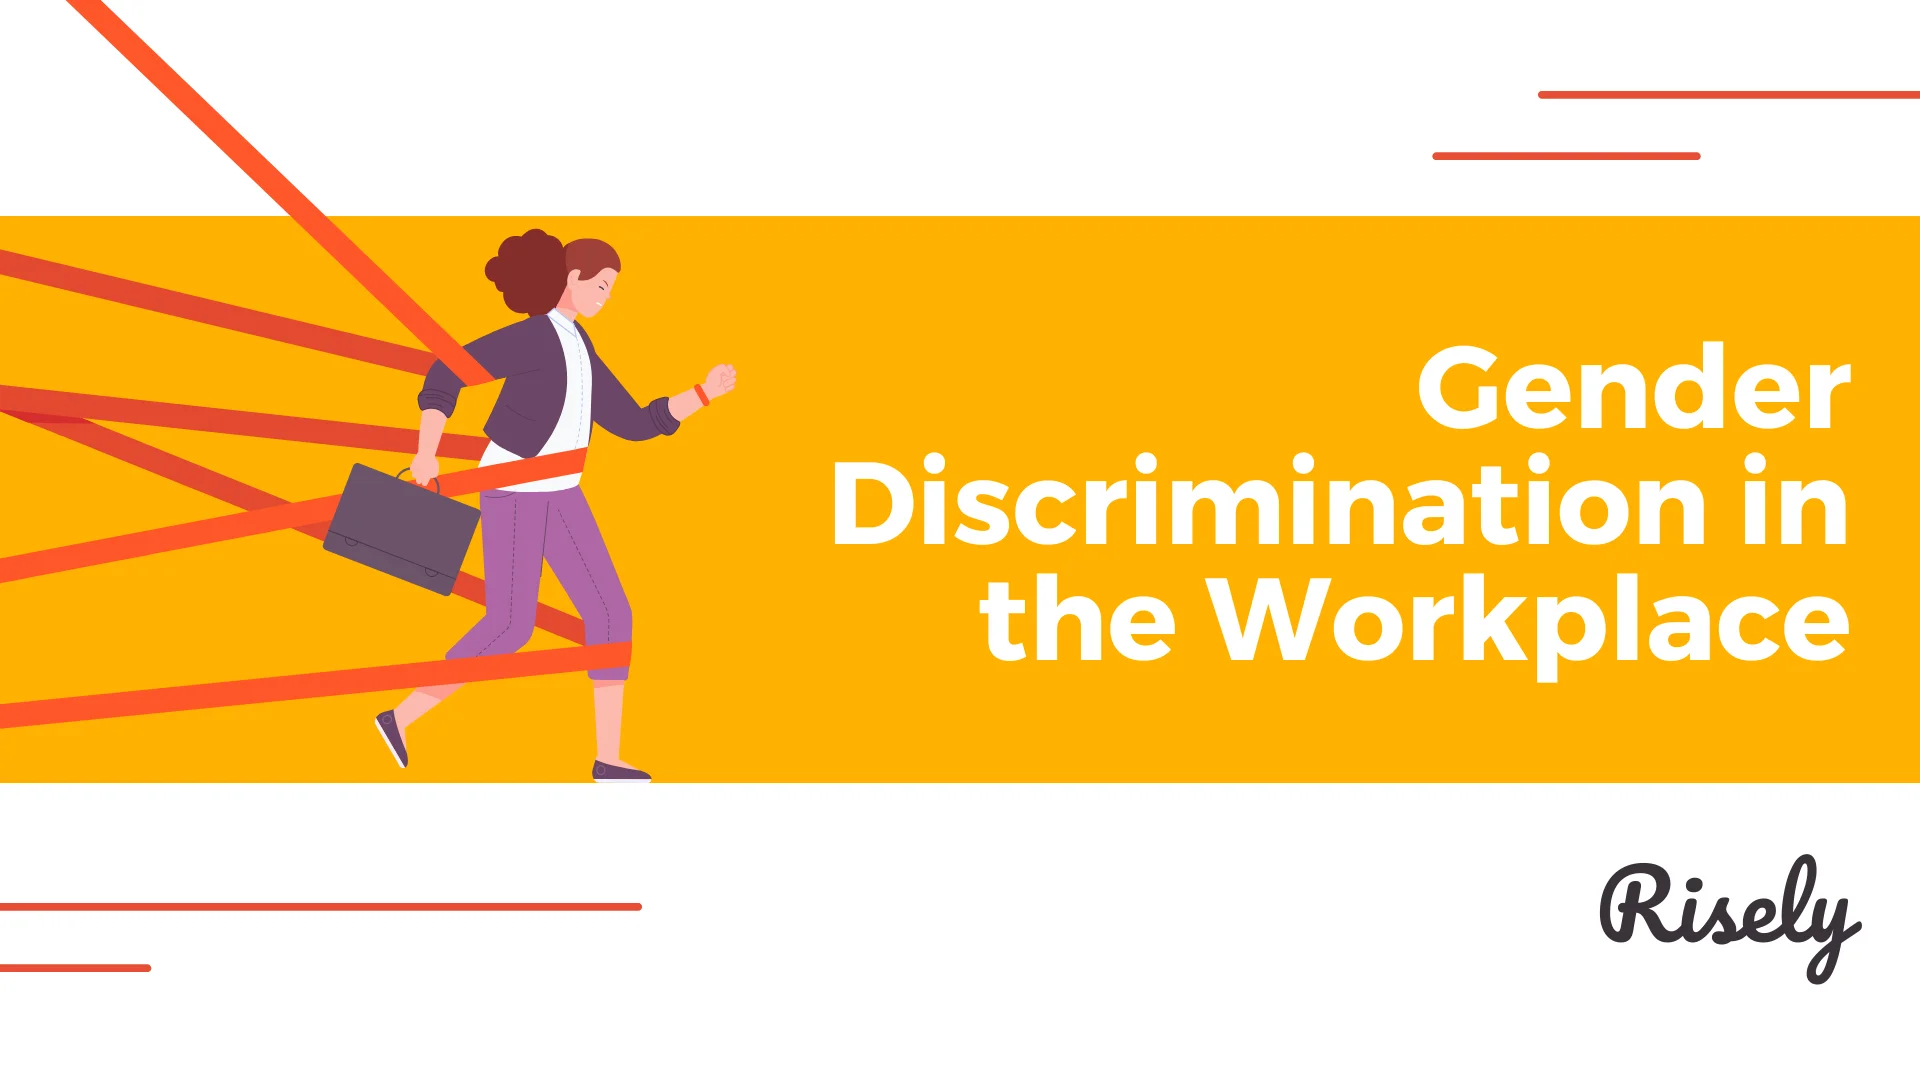 Gender Discrimination In The Workplace: What Can Managers Do